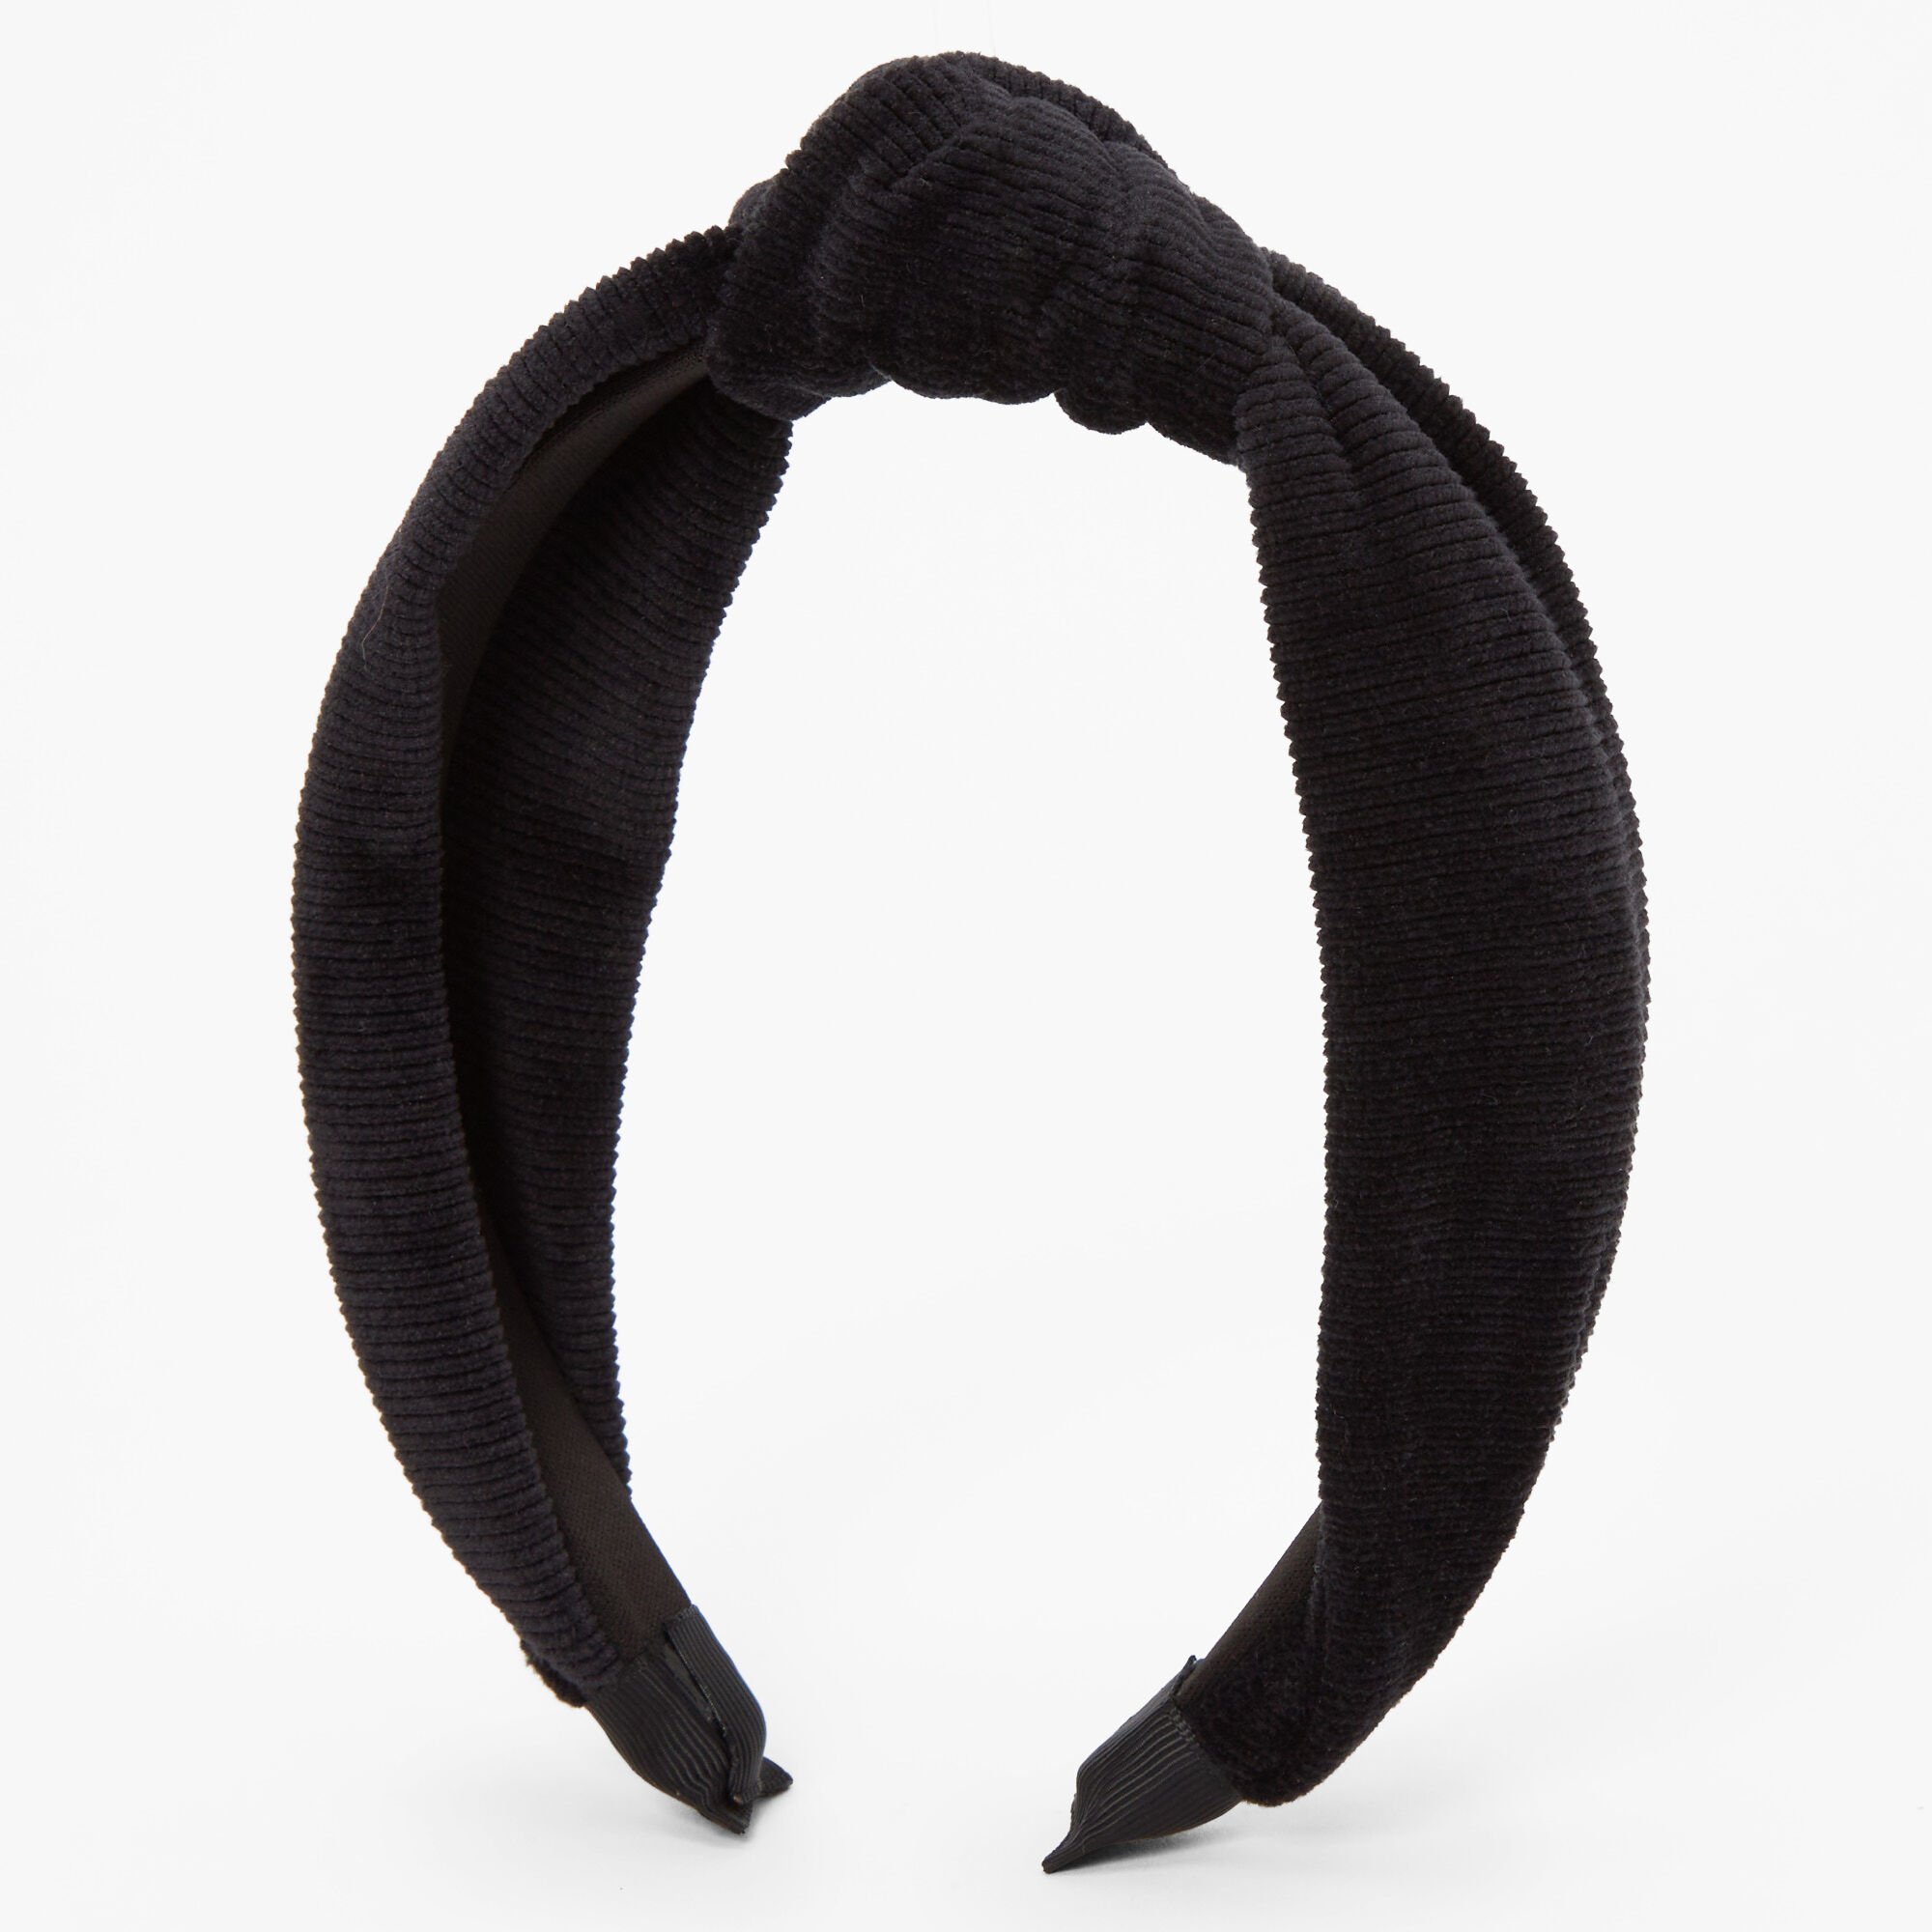 View Claires Ribbed Knotted Headband Black information